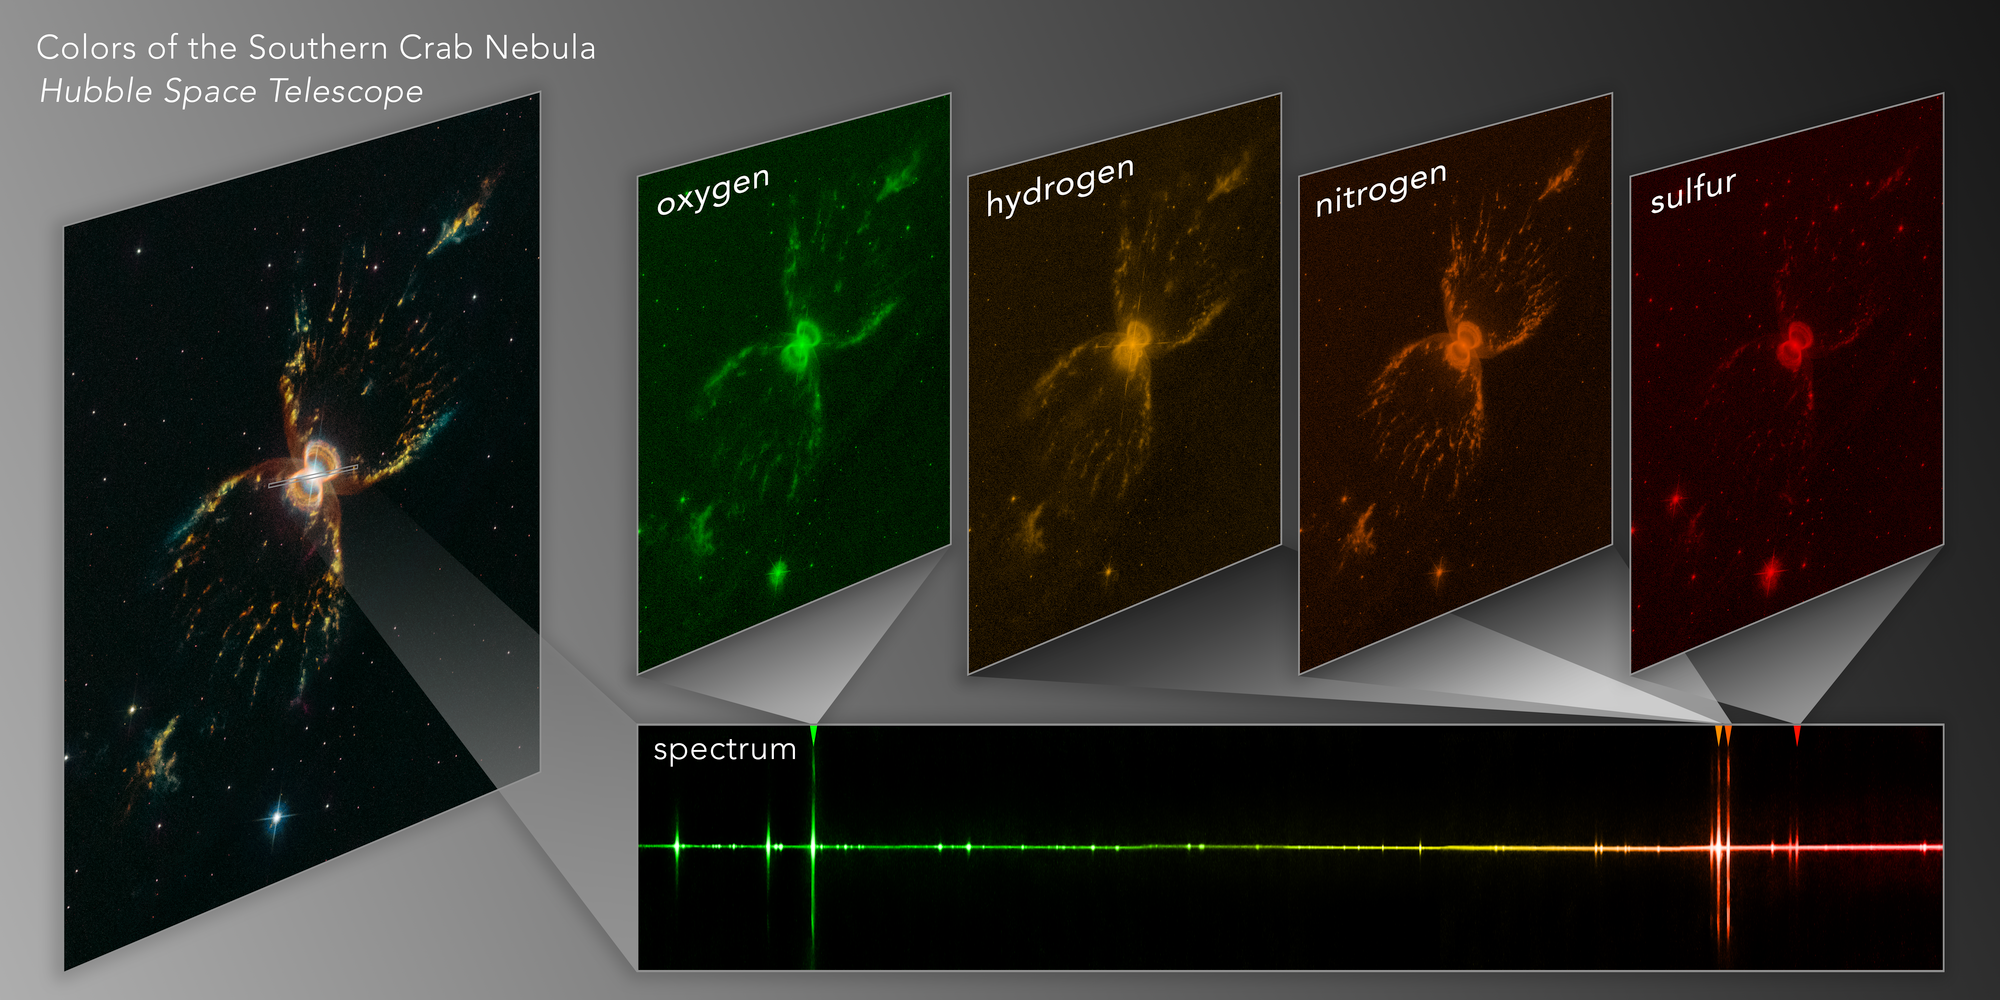 Against a gray background, this graphic shows a Hubble image of the Crab Nebula at left. To the right, four repeated images in different colors (green, yellow, orange, and red) show the different present elements in the nebula. Beneath them, a horizontal row seen as a jagged rainbow-colored line represents its spectrum.